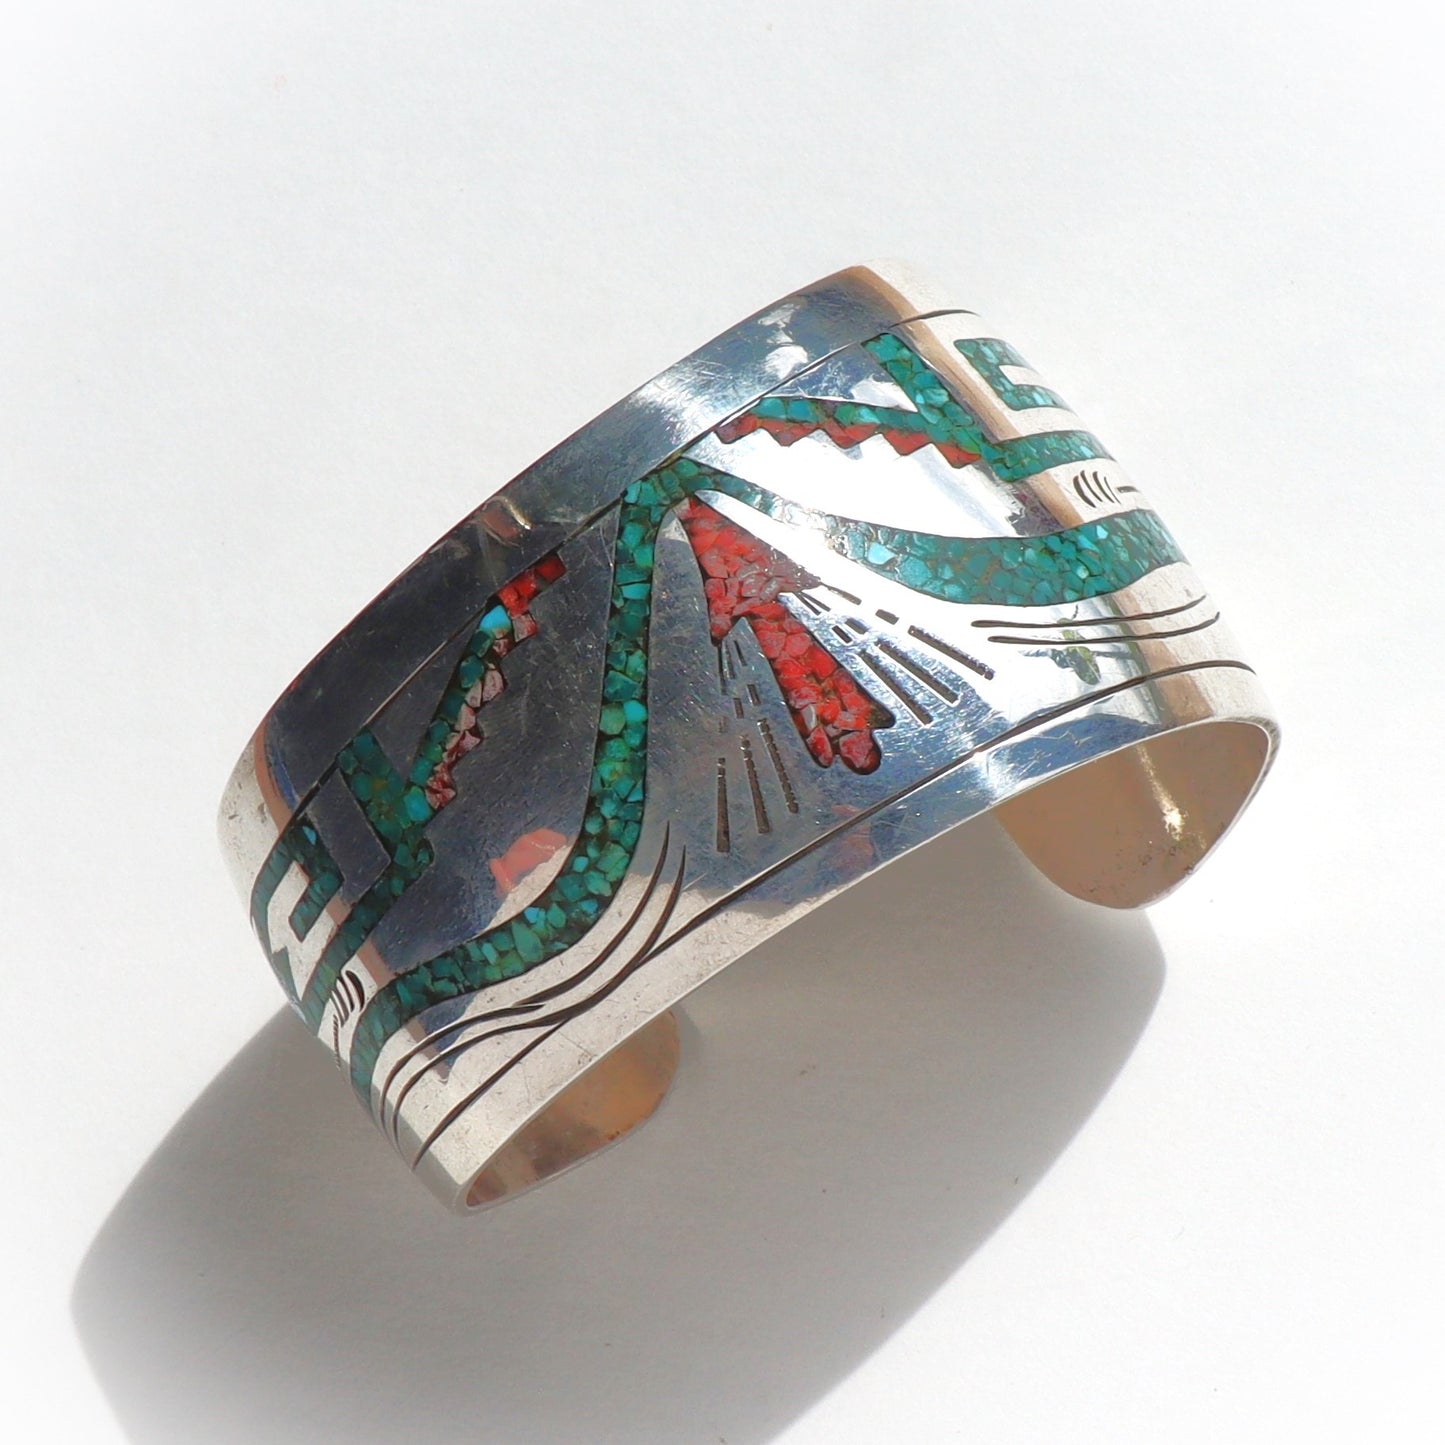 Vintage Navajo Sterling Silver Turquoise & Coral Chip Composite Inlay Asymmetrical Cuff Bracelet Signed